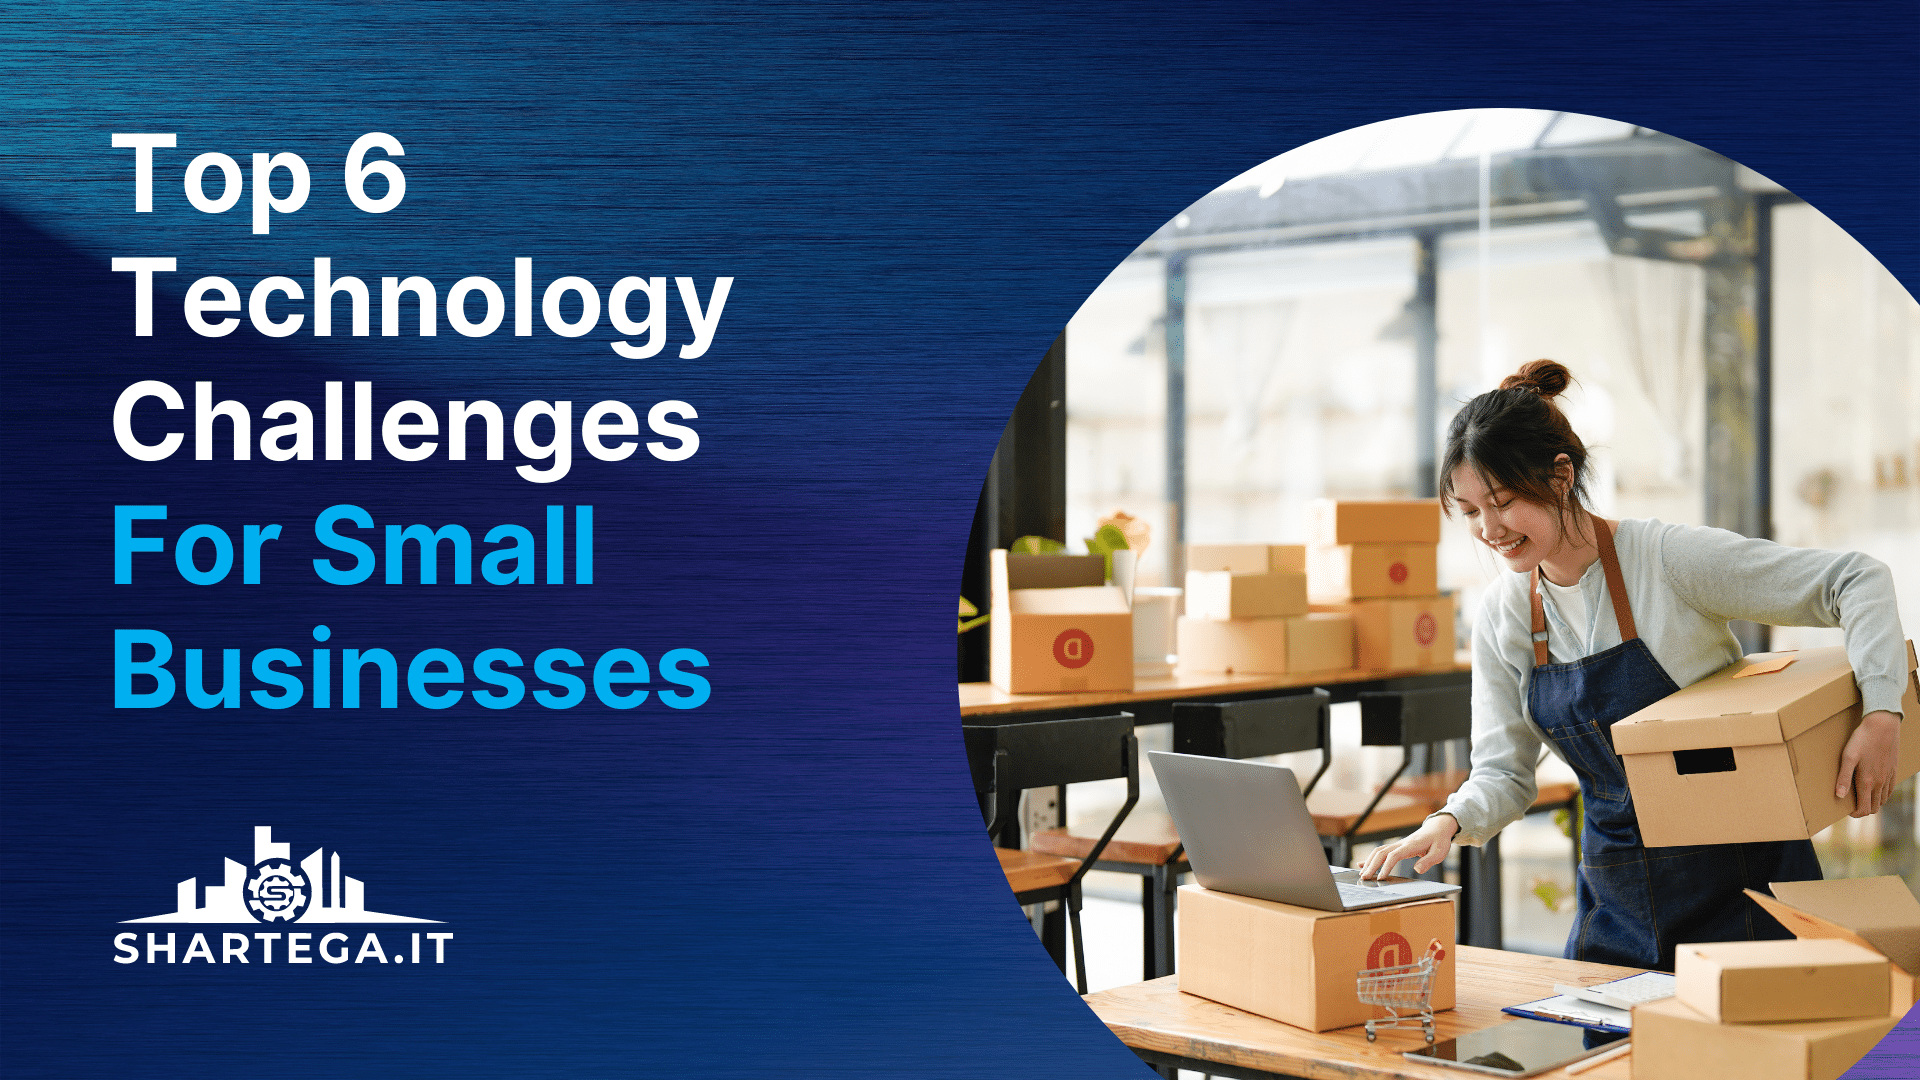 Top 6 Technology Challenges For Small Businesses